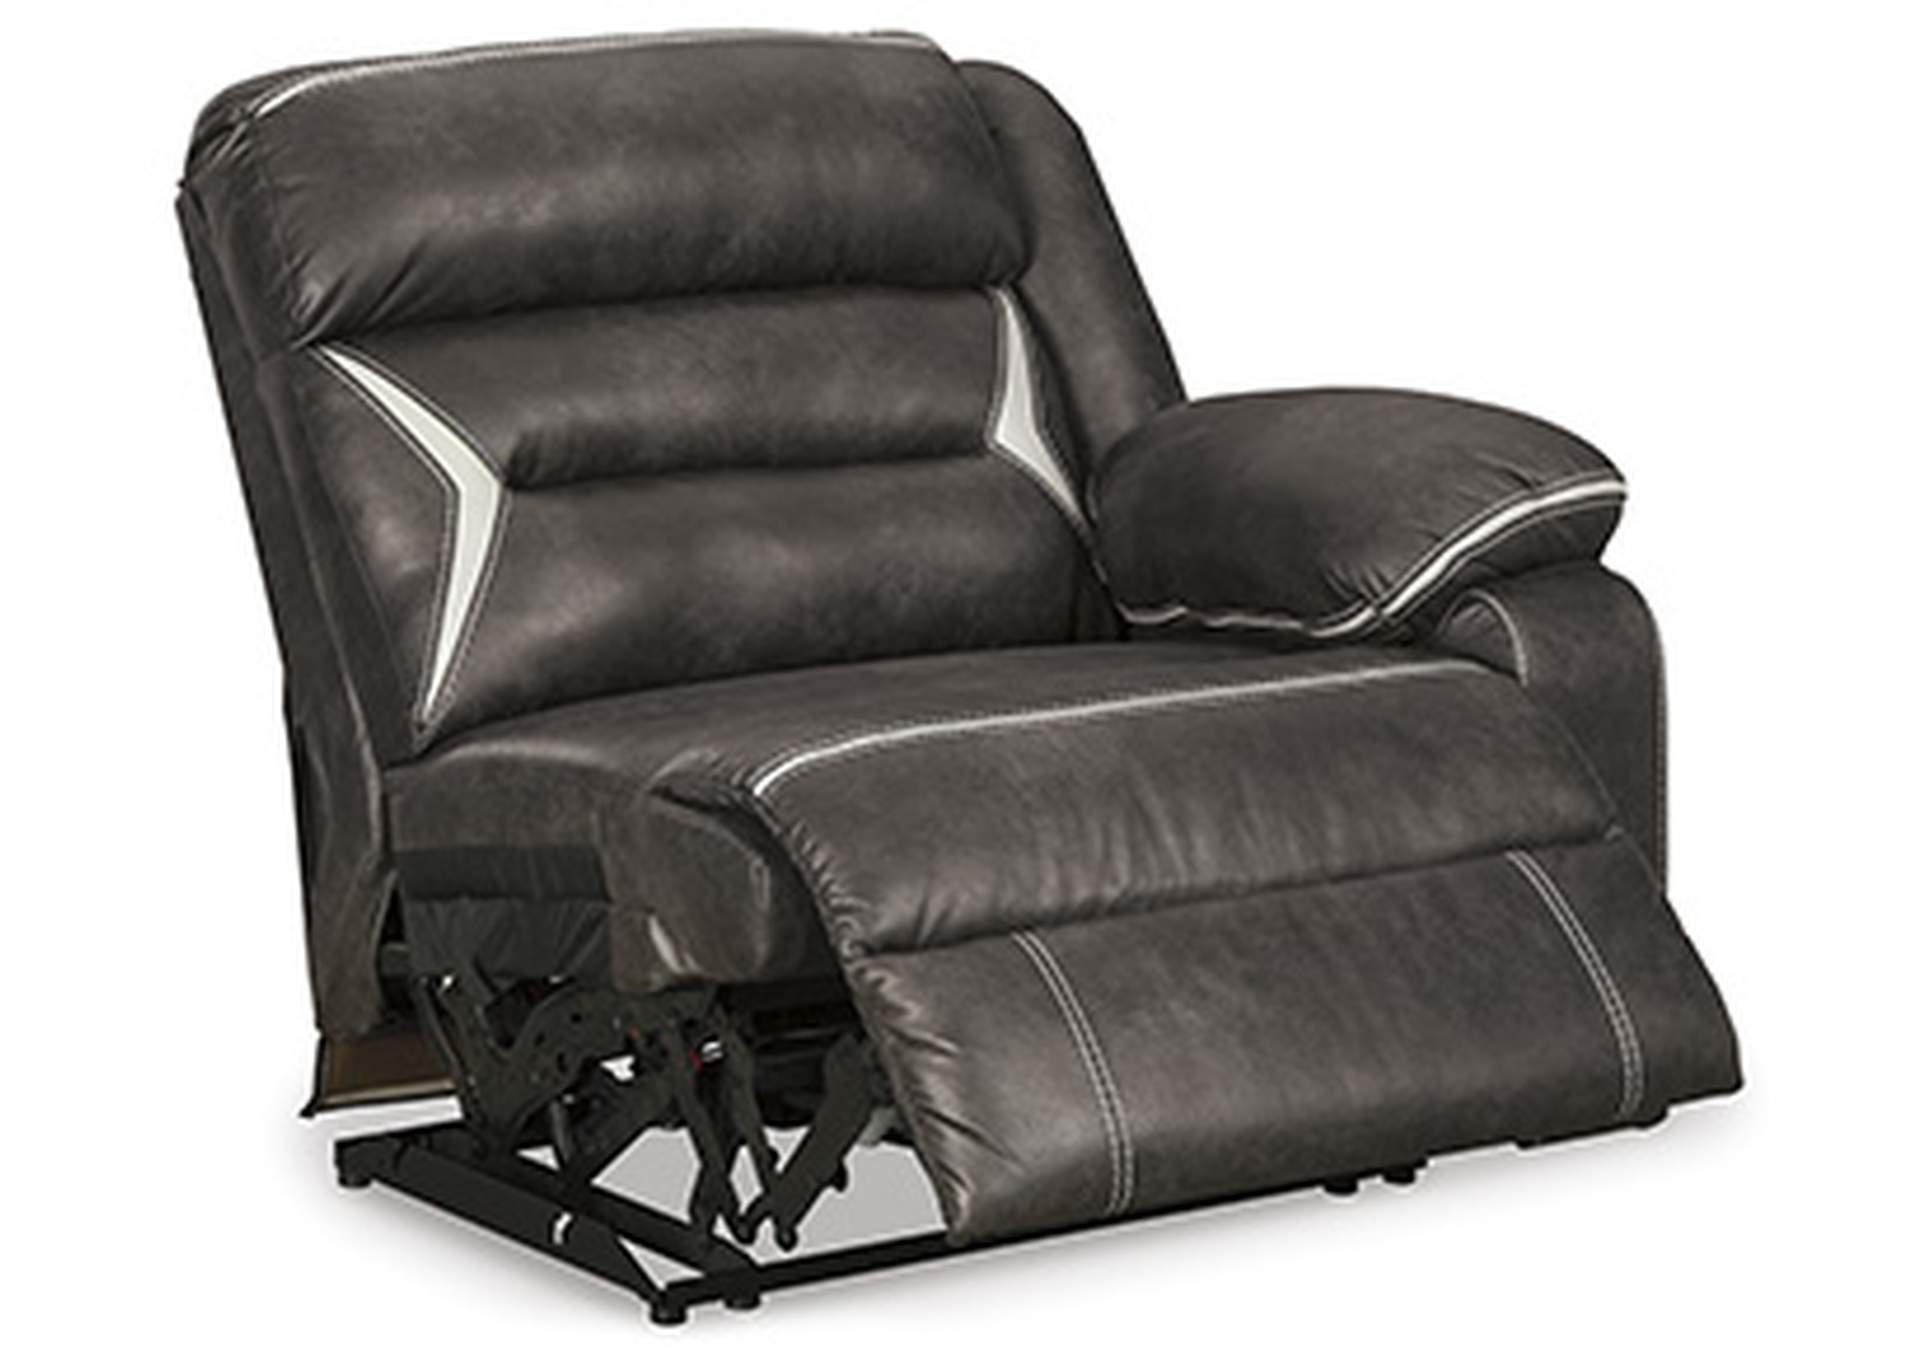 Kincord Right-Arm Facing Power Recliner,Signature Design By Ashley